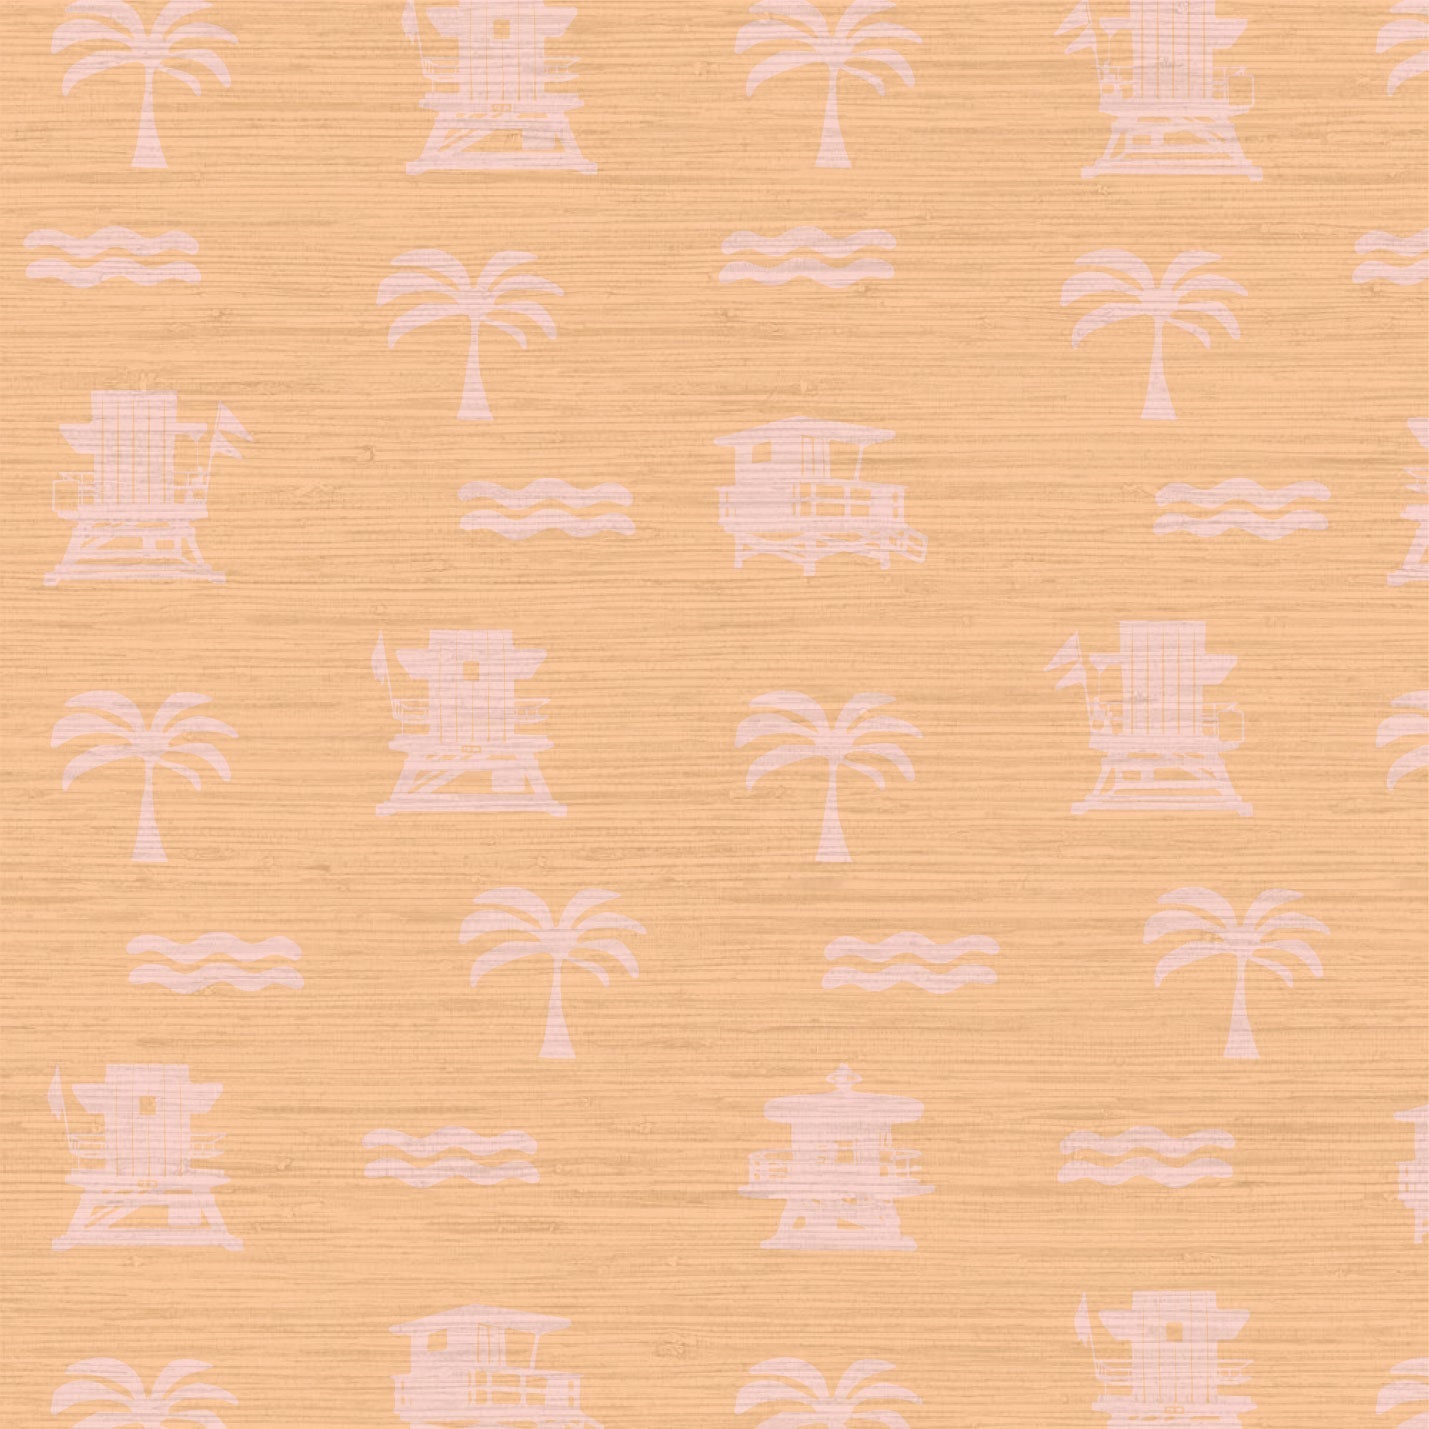 Grasscloth Natural Textured Eco-Friendly Non-toxic High-quality Sustainable practices Sustainability Interior Design Wall covering wallpaper grid seaside coastal seashore waterfront vacation home styling retreat relaxed beach vibes beach cottage shoreline oceanfront nautical tropical ocean waves palm tree lifeguard stand mini print custom interior design beach house sunset orange tangerine coral light pink baby